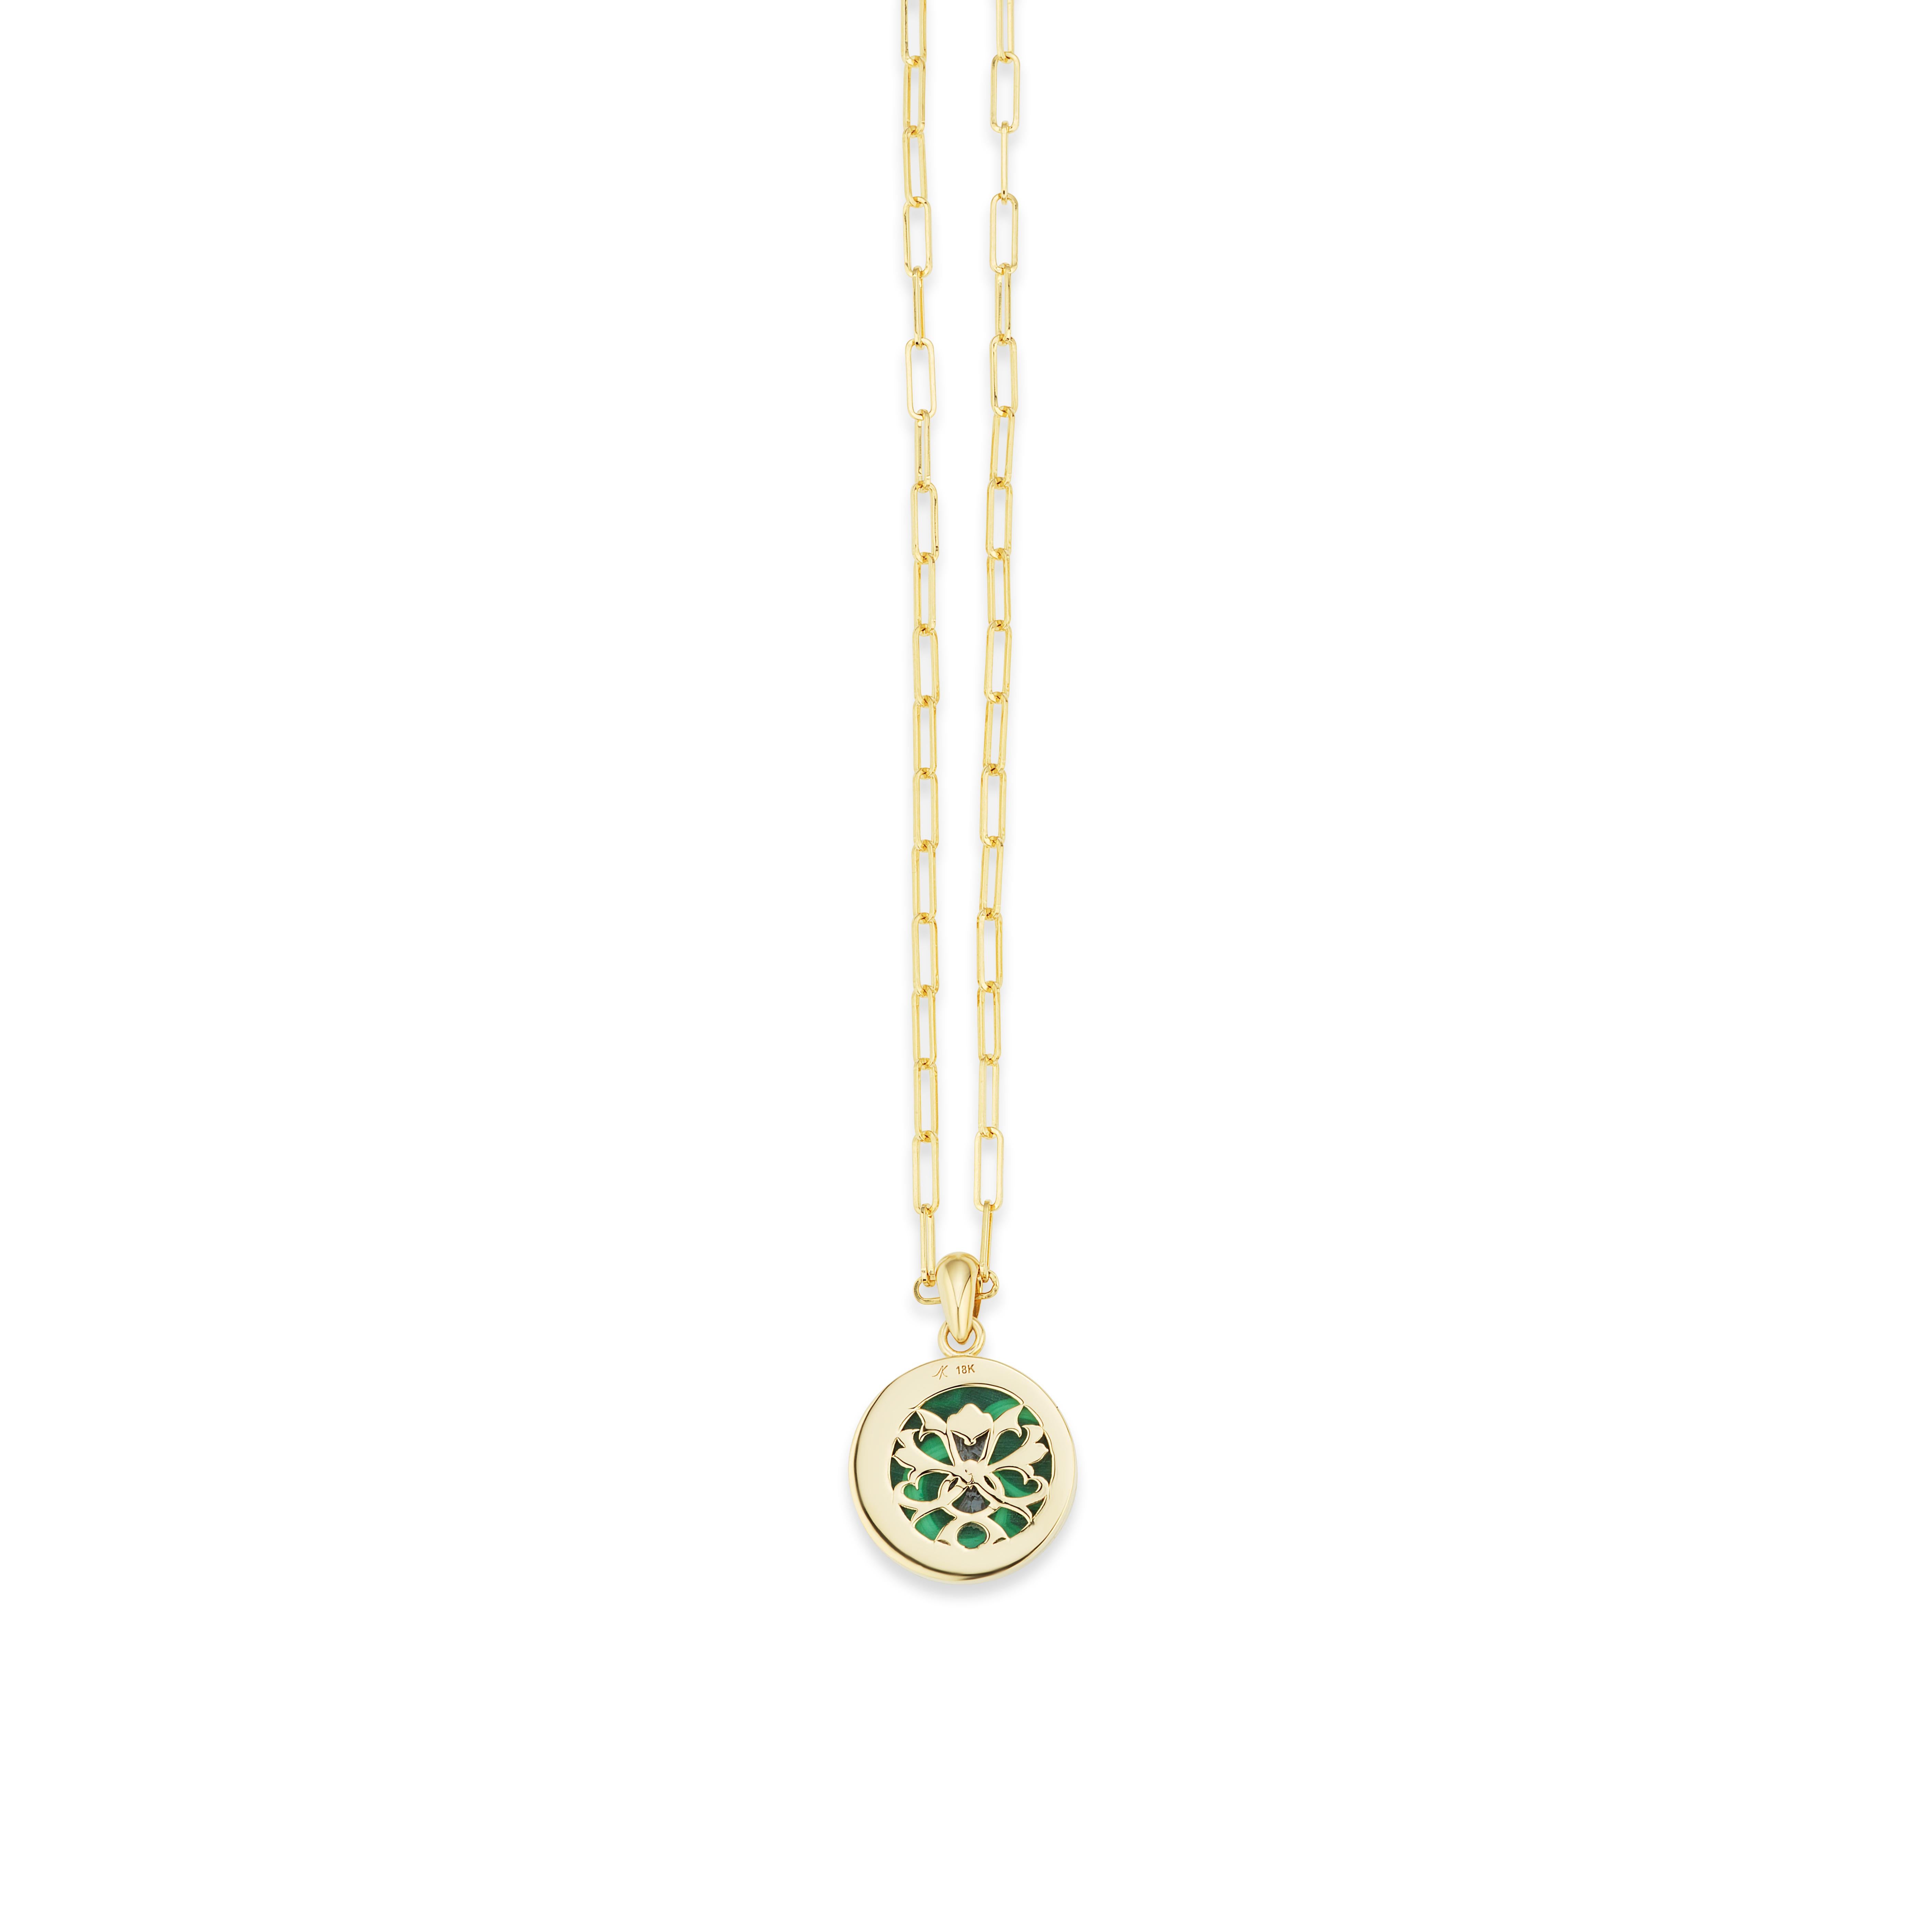 Women's or Men's AnaKatarina Elements 'Earth' Pendant in 18k Gold, Malachite, Ruby, and Diamond For Sale